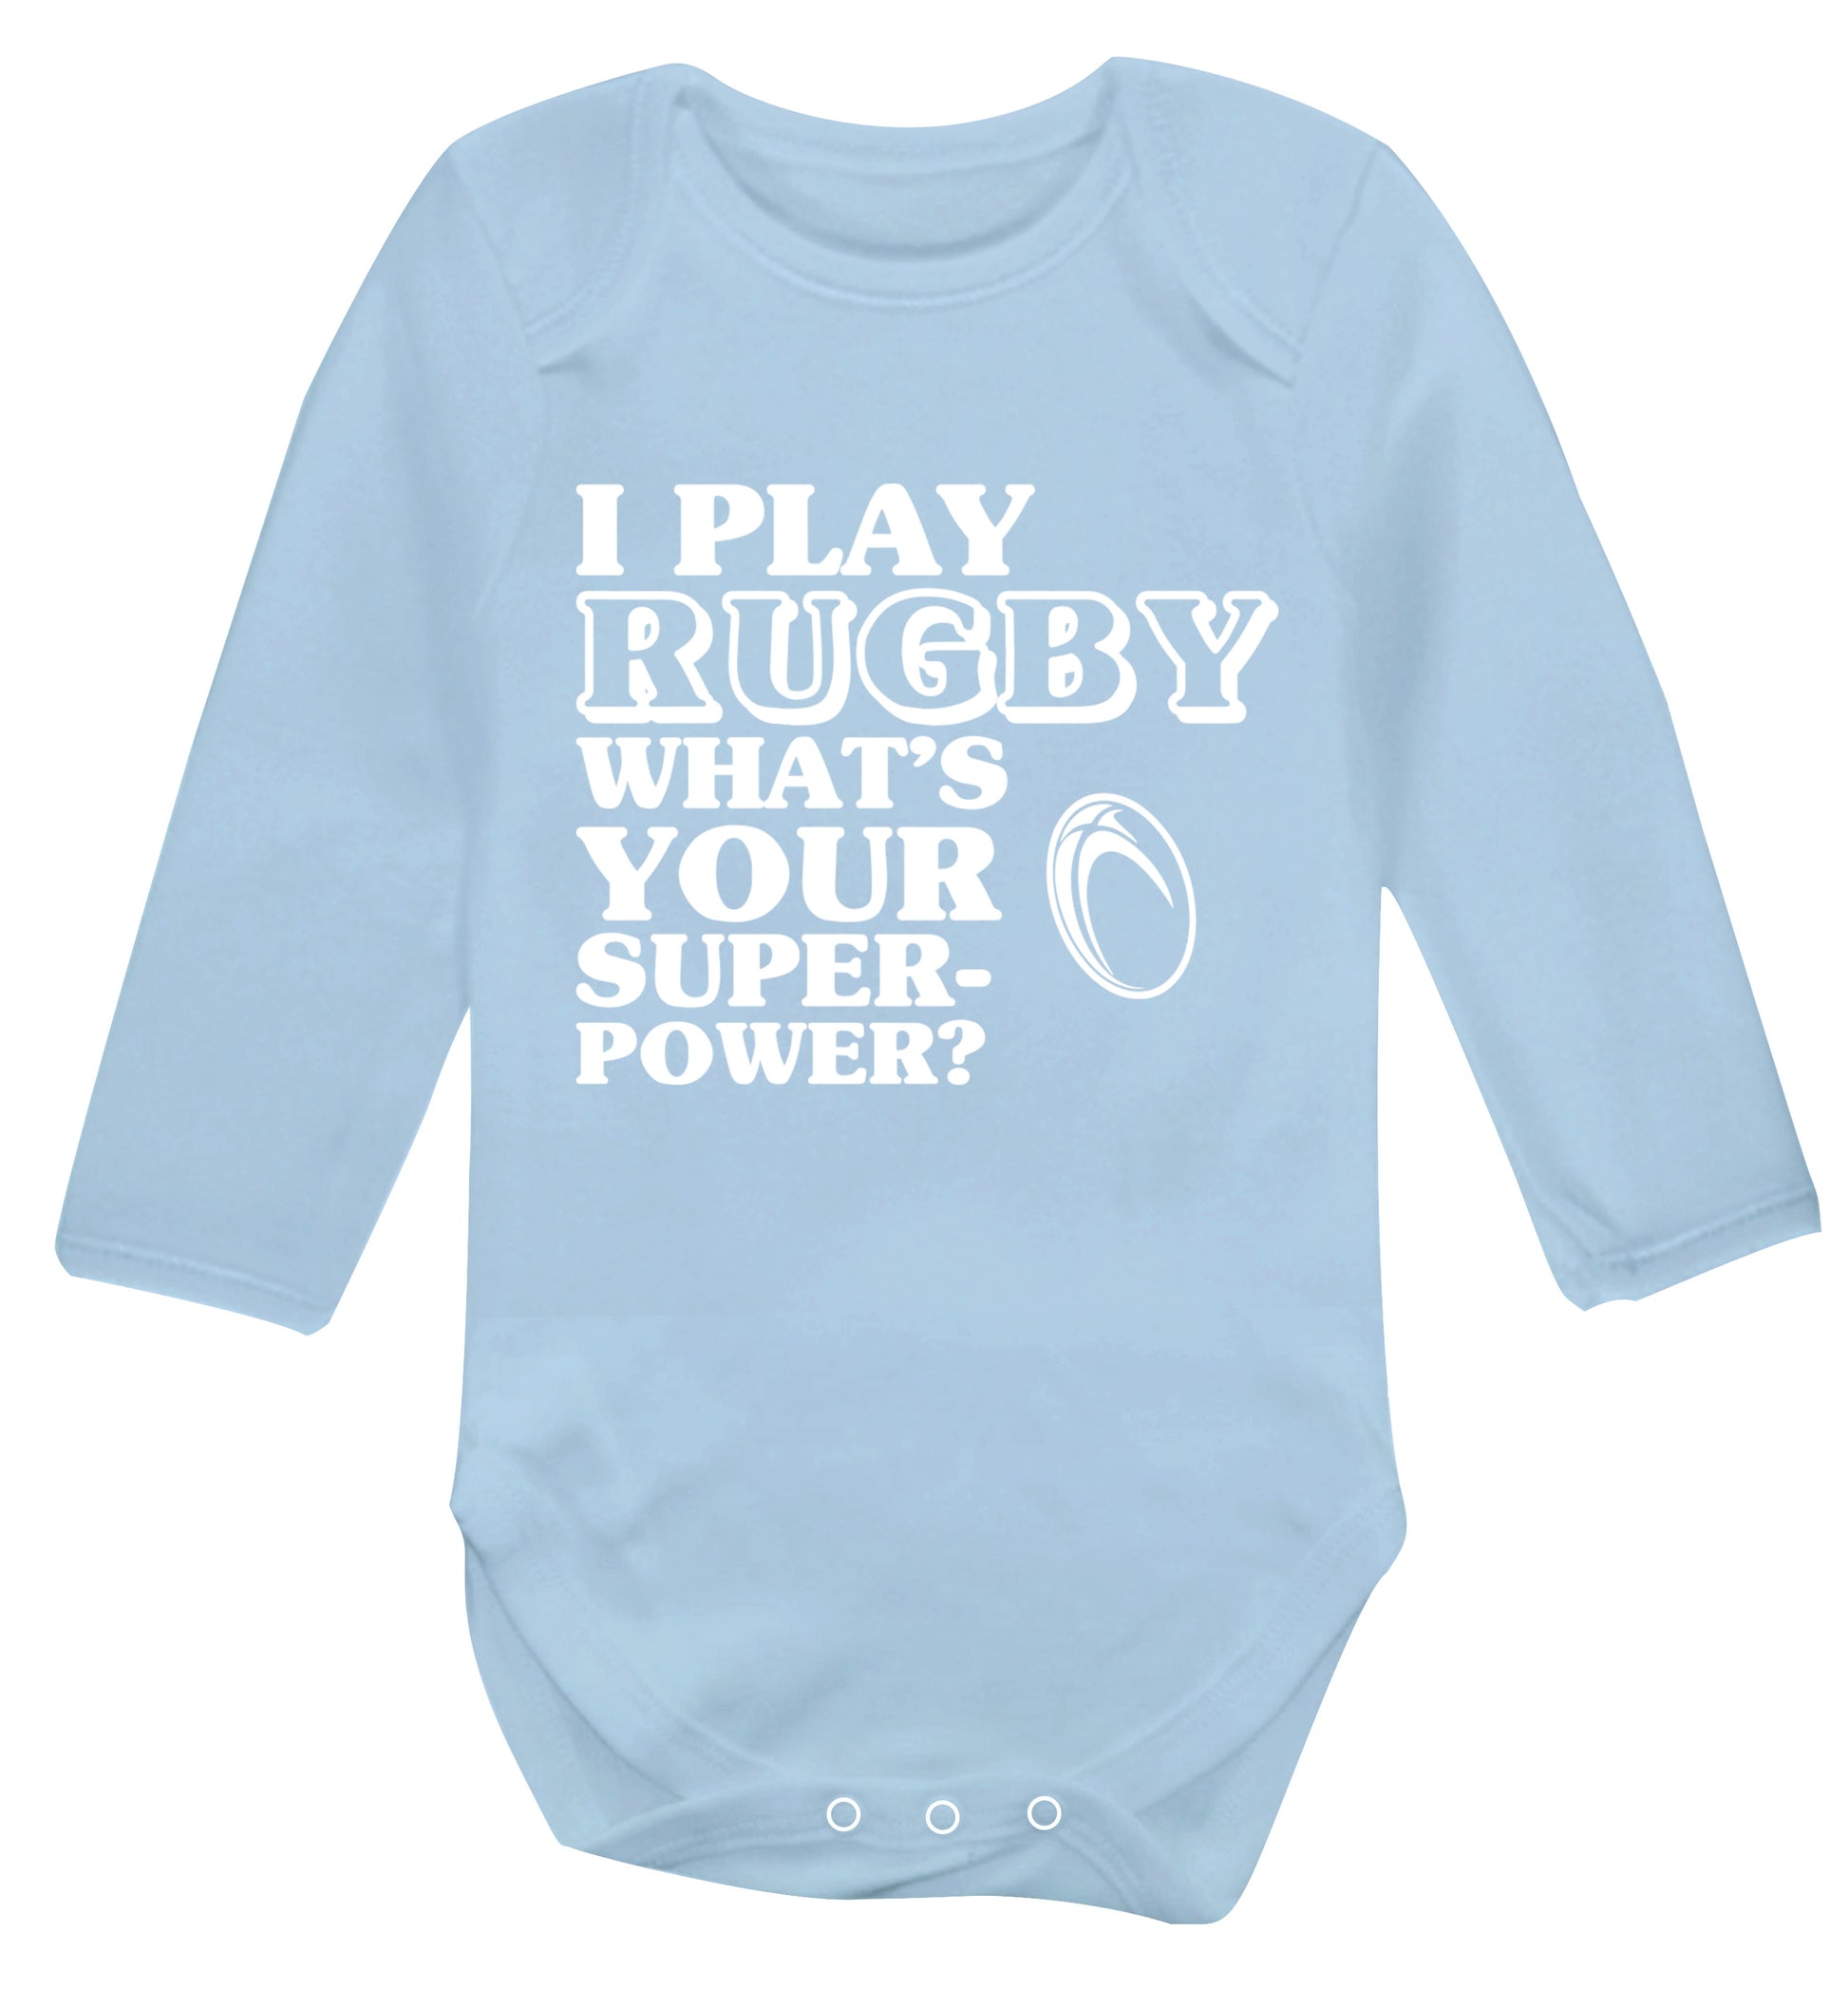 I play rugby what's your superpower? Baby Vest long sleeved pale blue 6-12 months